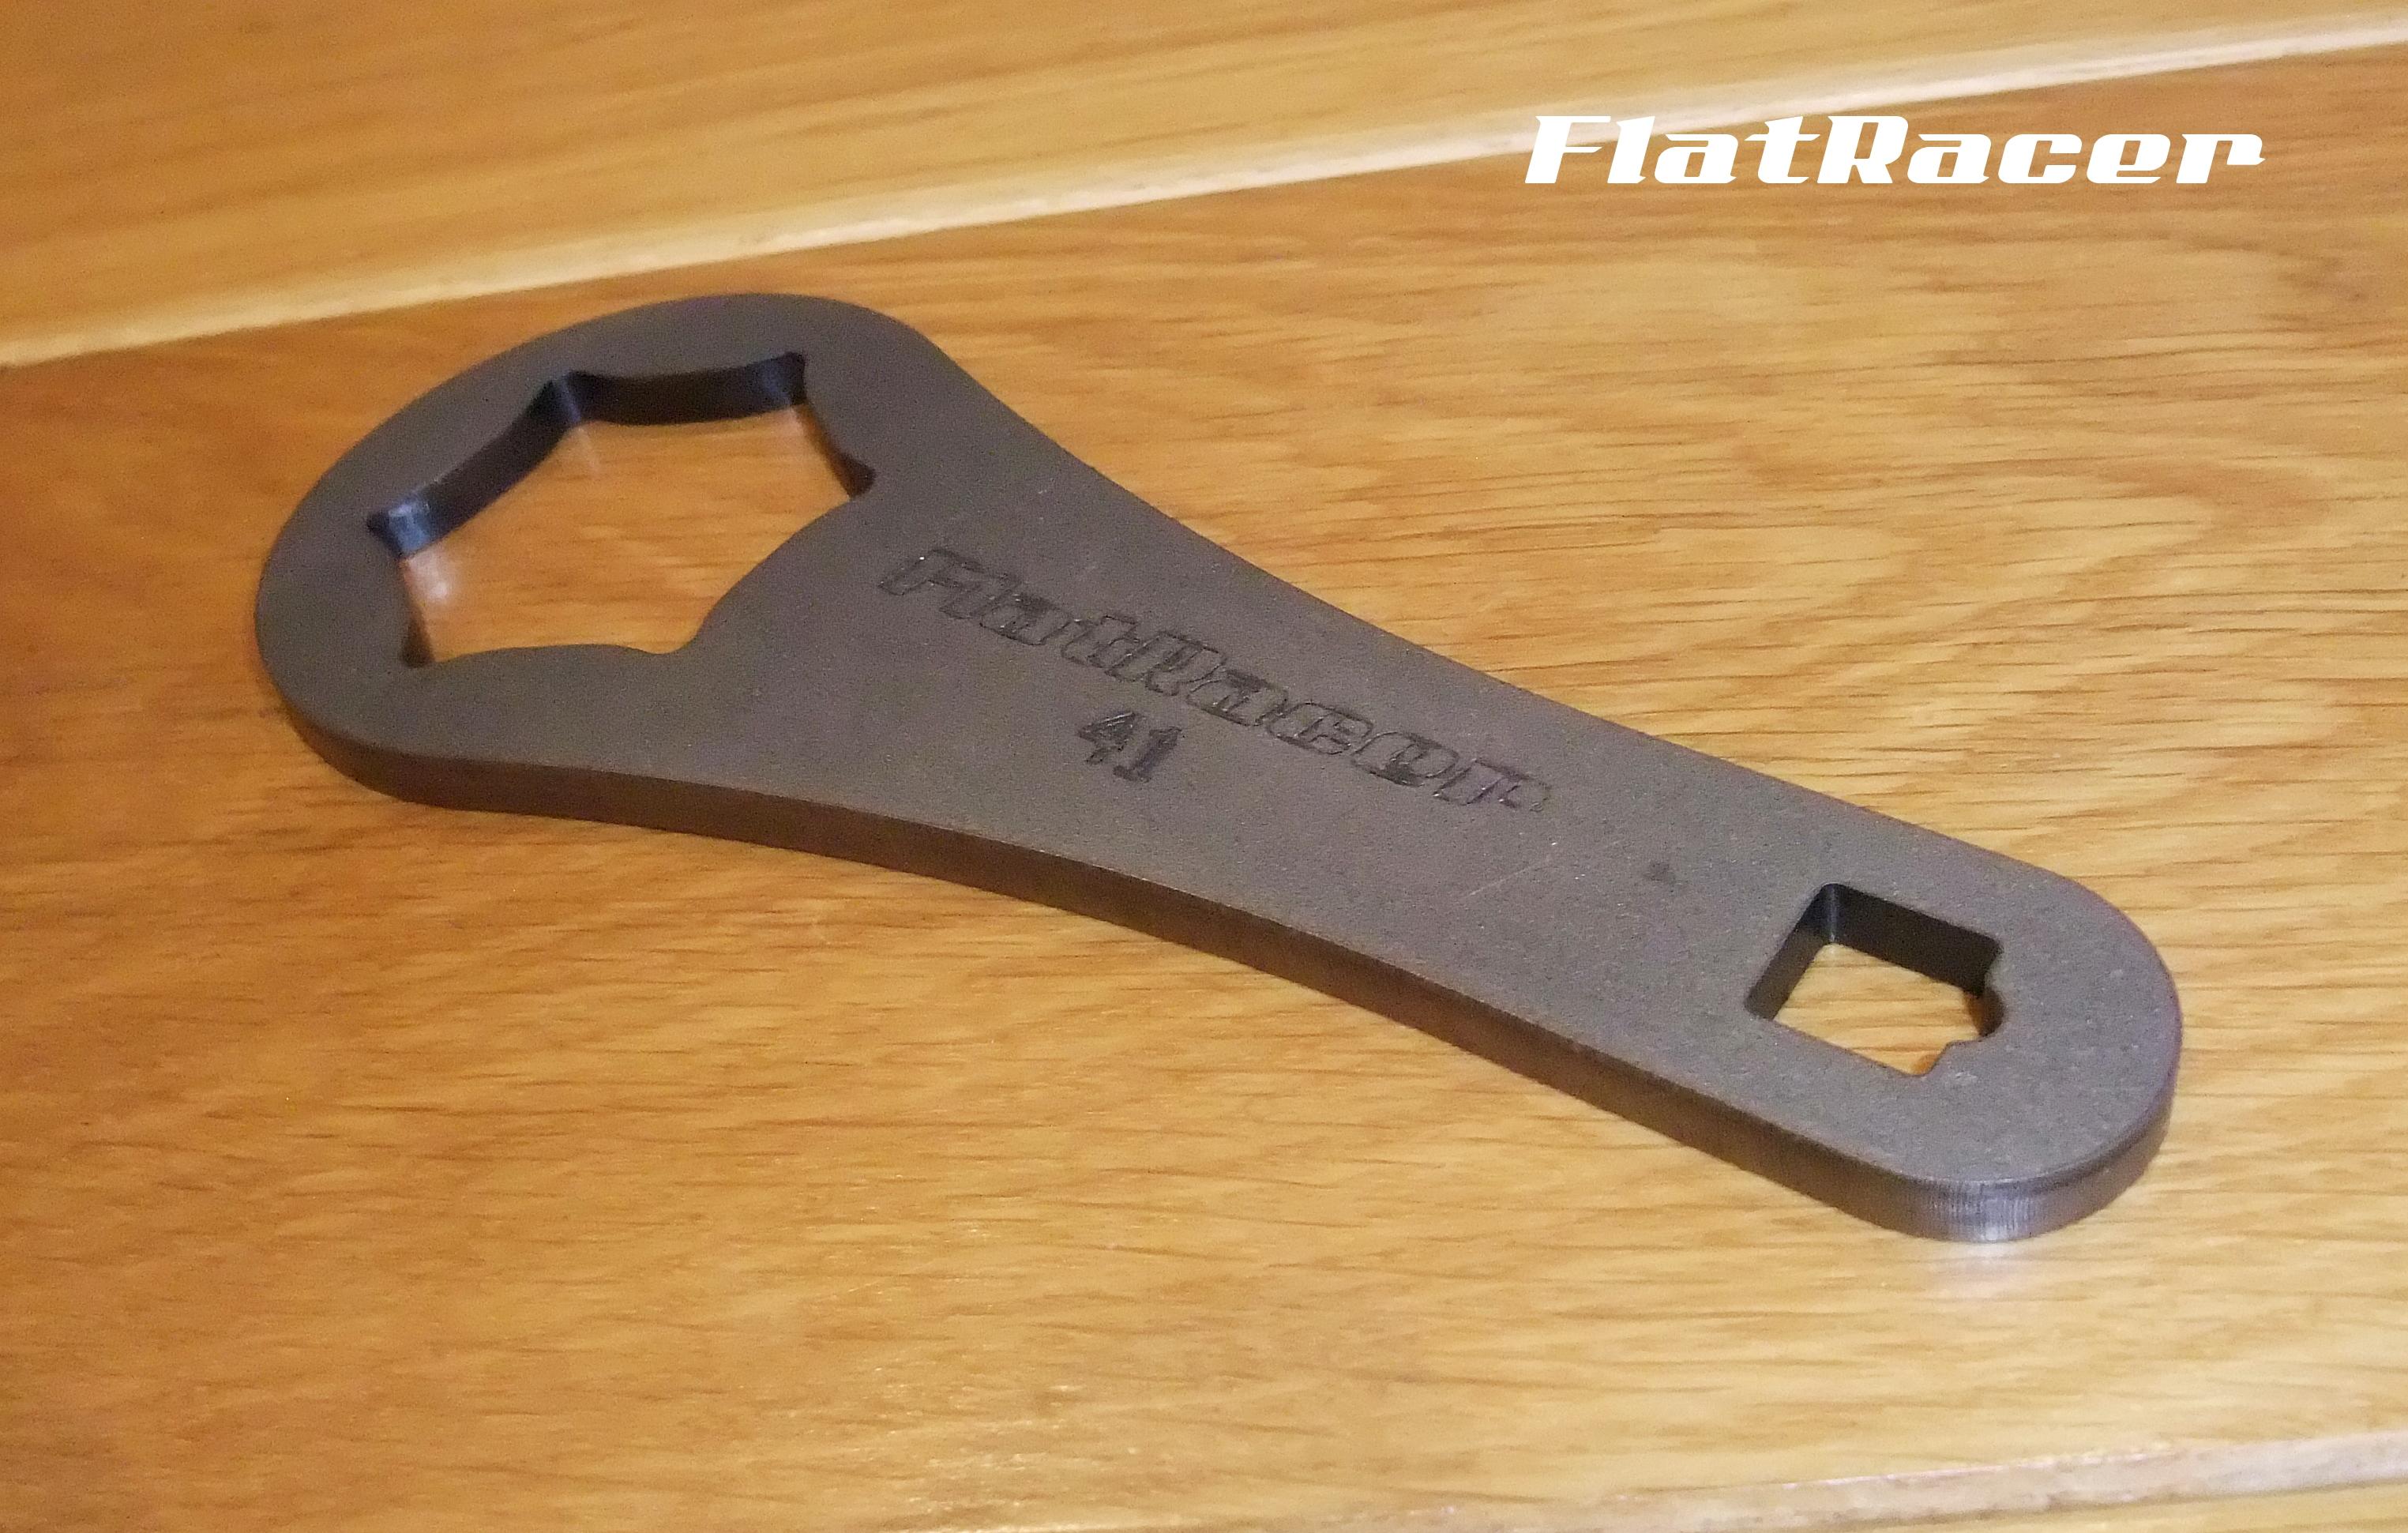 FlatRacer BMW Airhead Boxer post 1985 top nuts 41mm spanner tool EBM 111